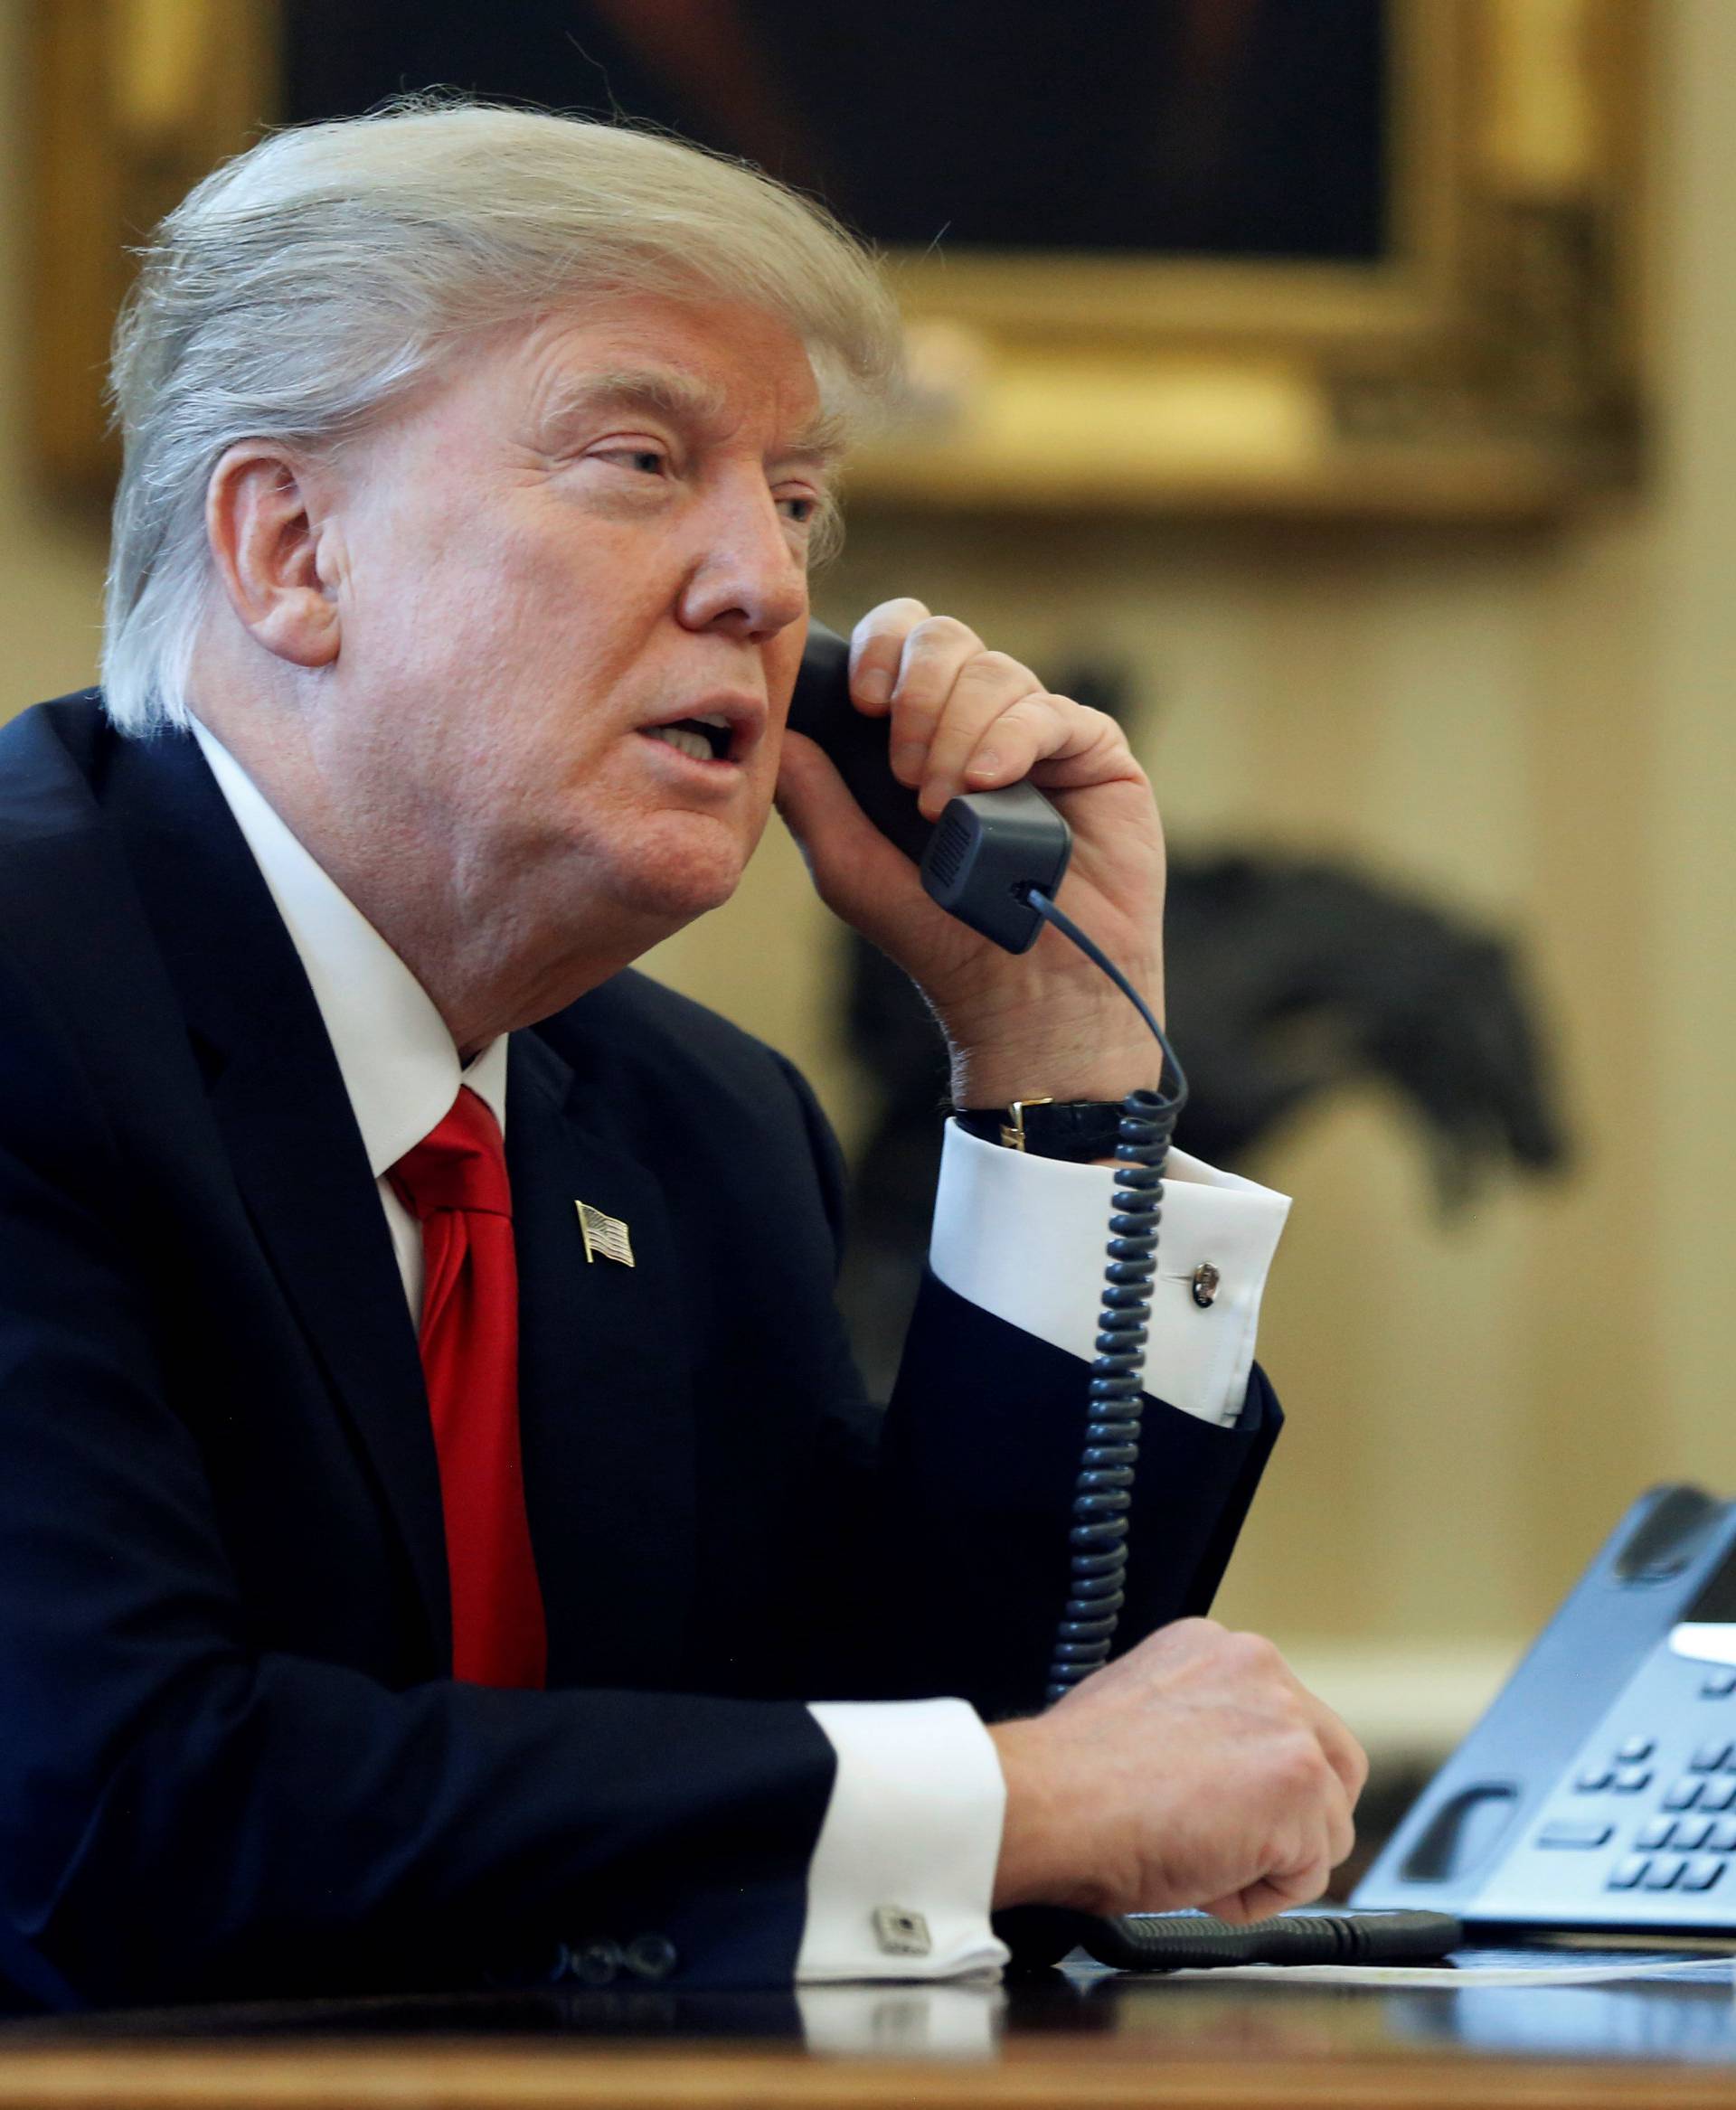 Trump speaks by phone with the Saudi Arabia's King in the Oval Office at the White House